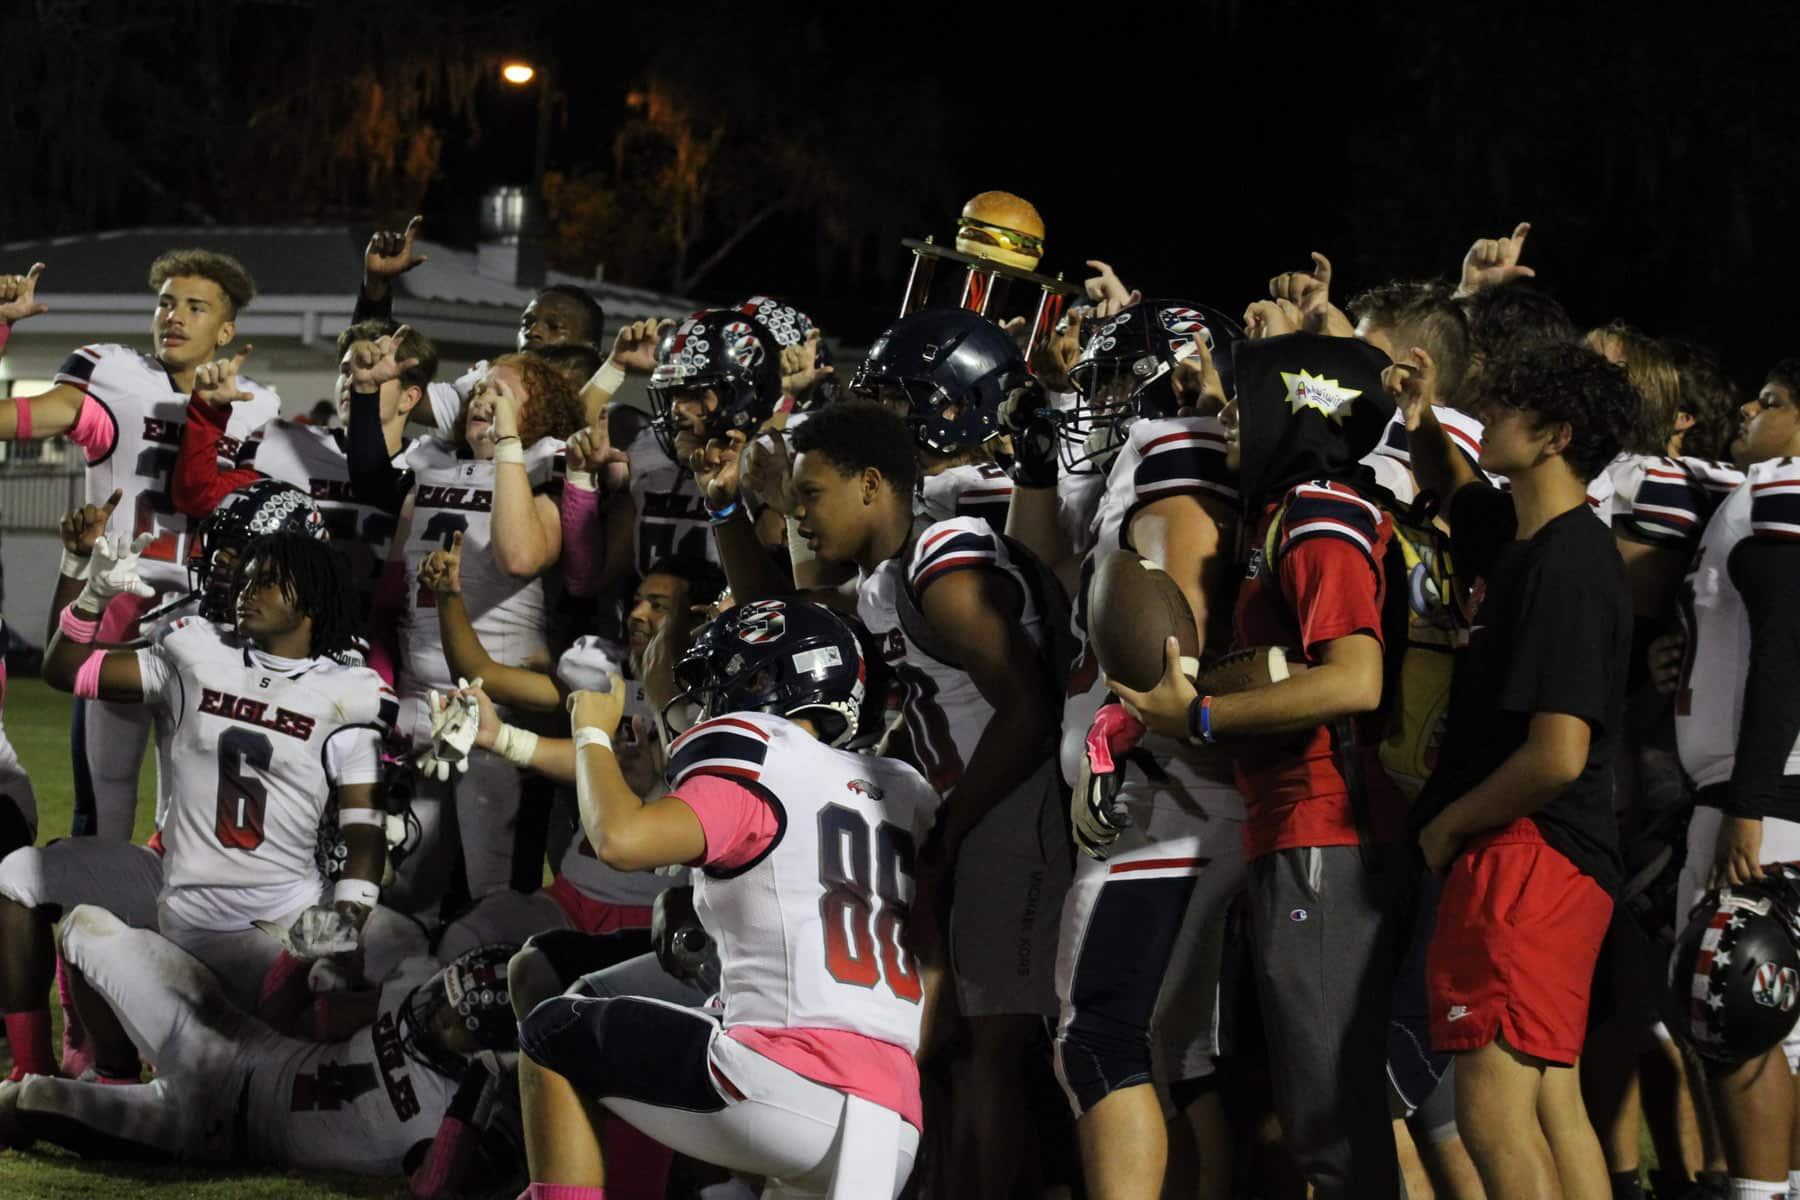 Springstead High School is the 2022 Burger Bowl victor. Photo by Hanna Fox.